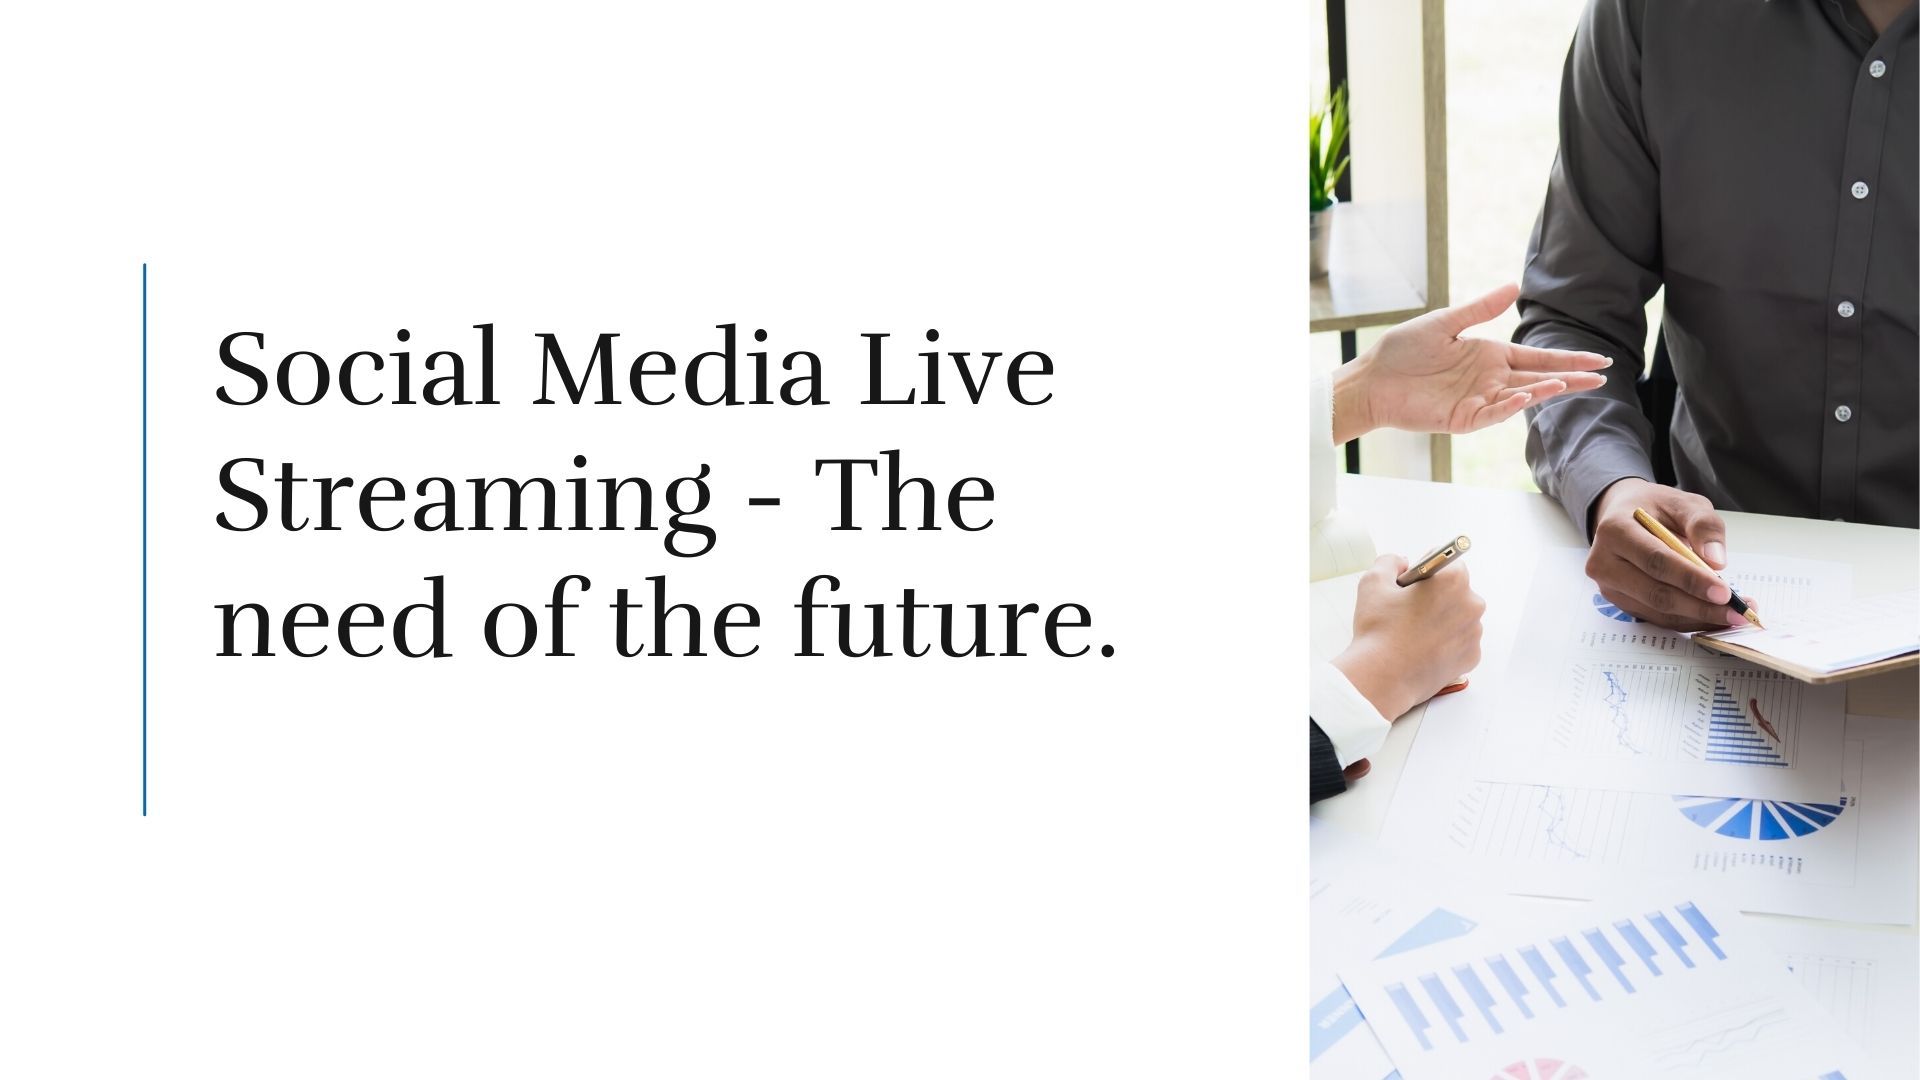 Social Media Live Streaming - The need of the future.